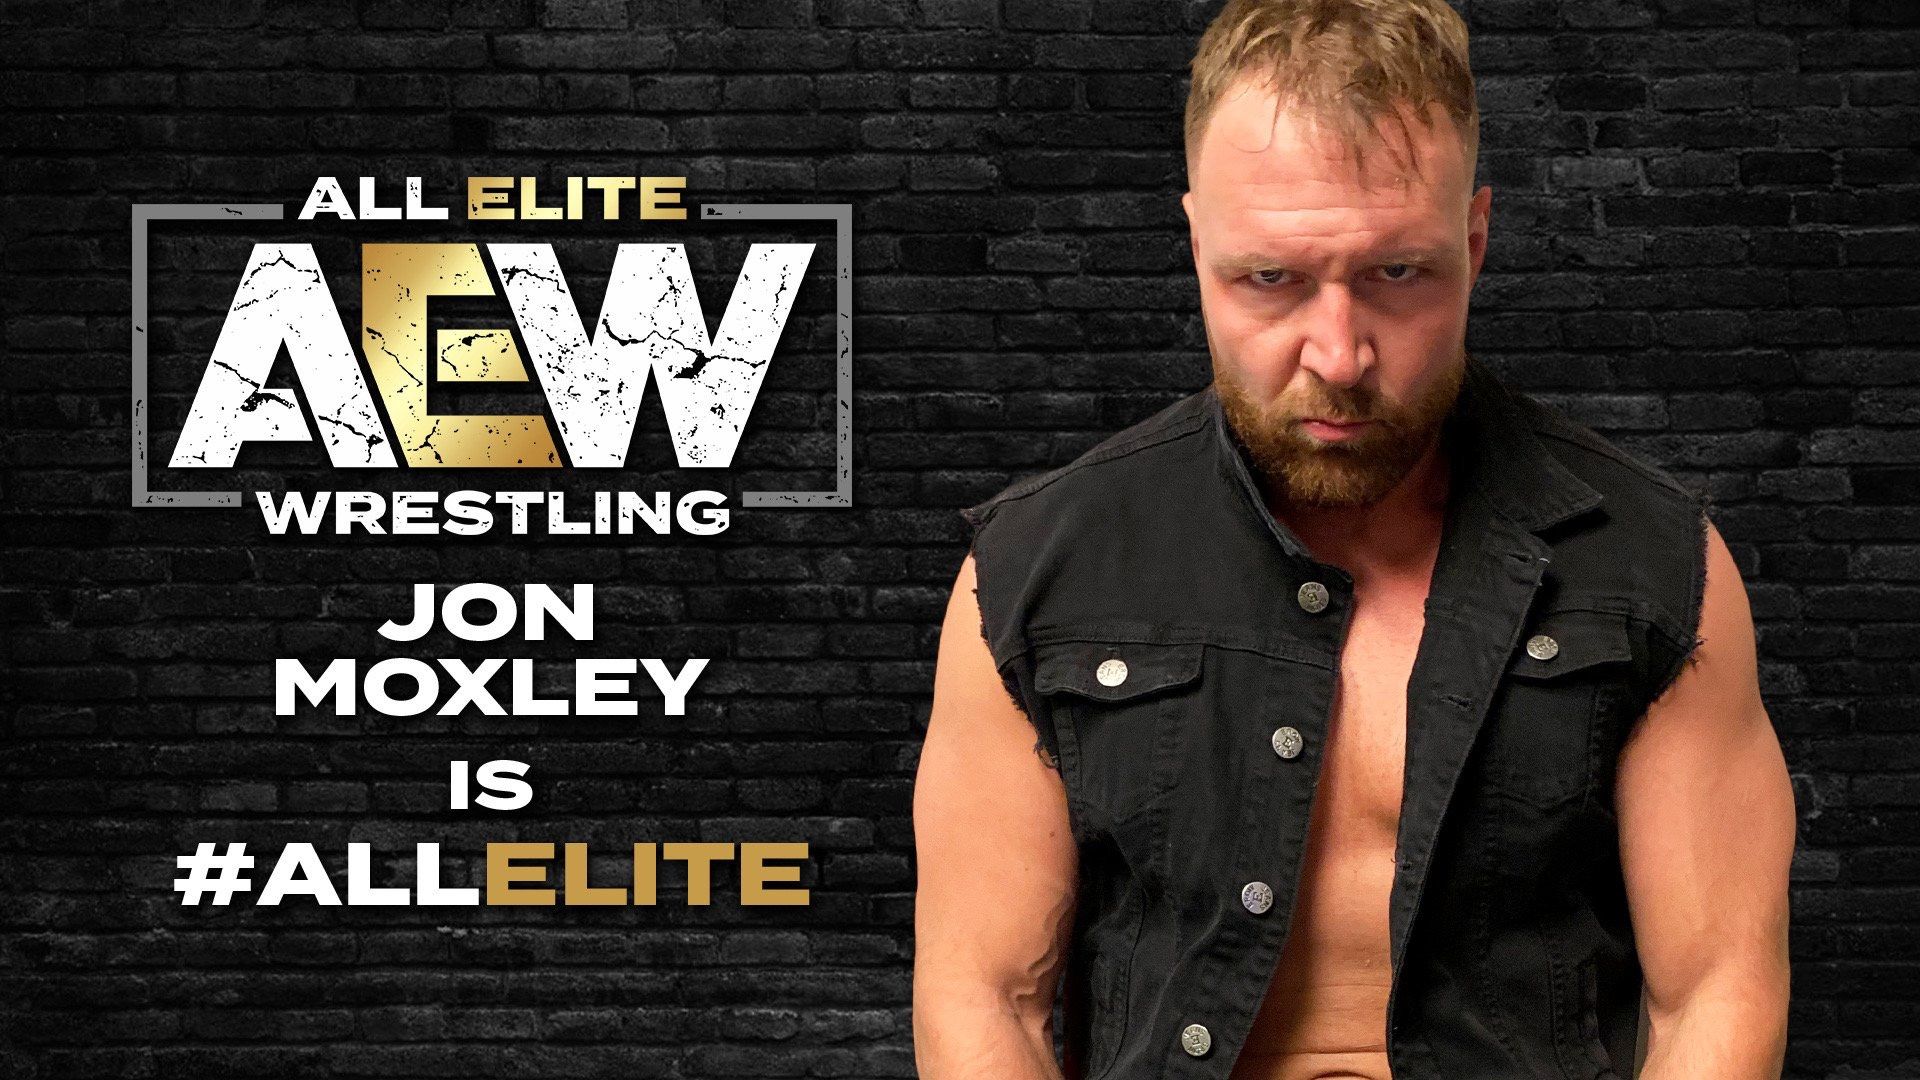 Jon Moxley's AEW In Ring Debut Announced